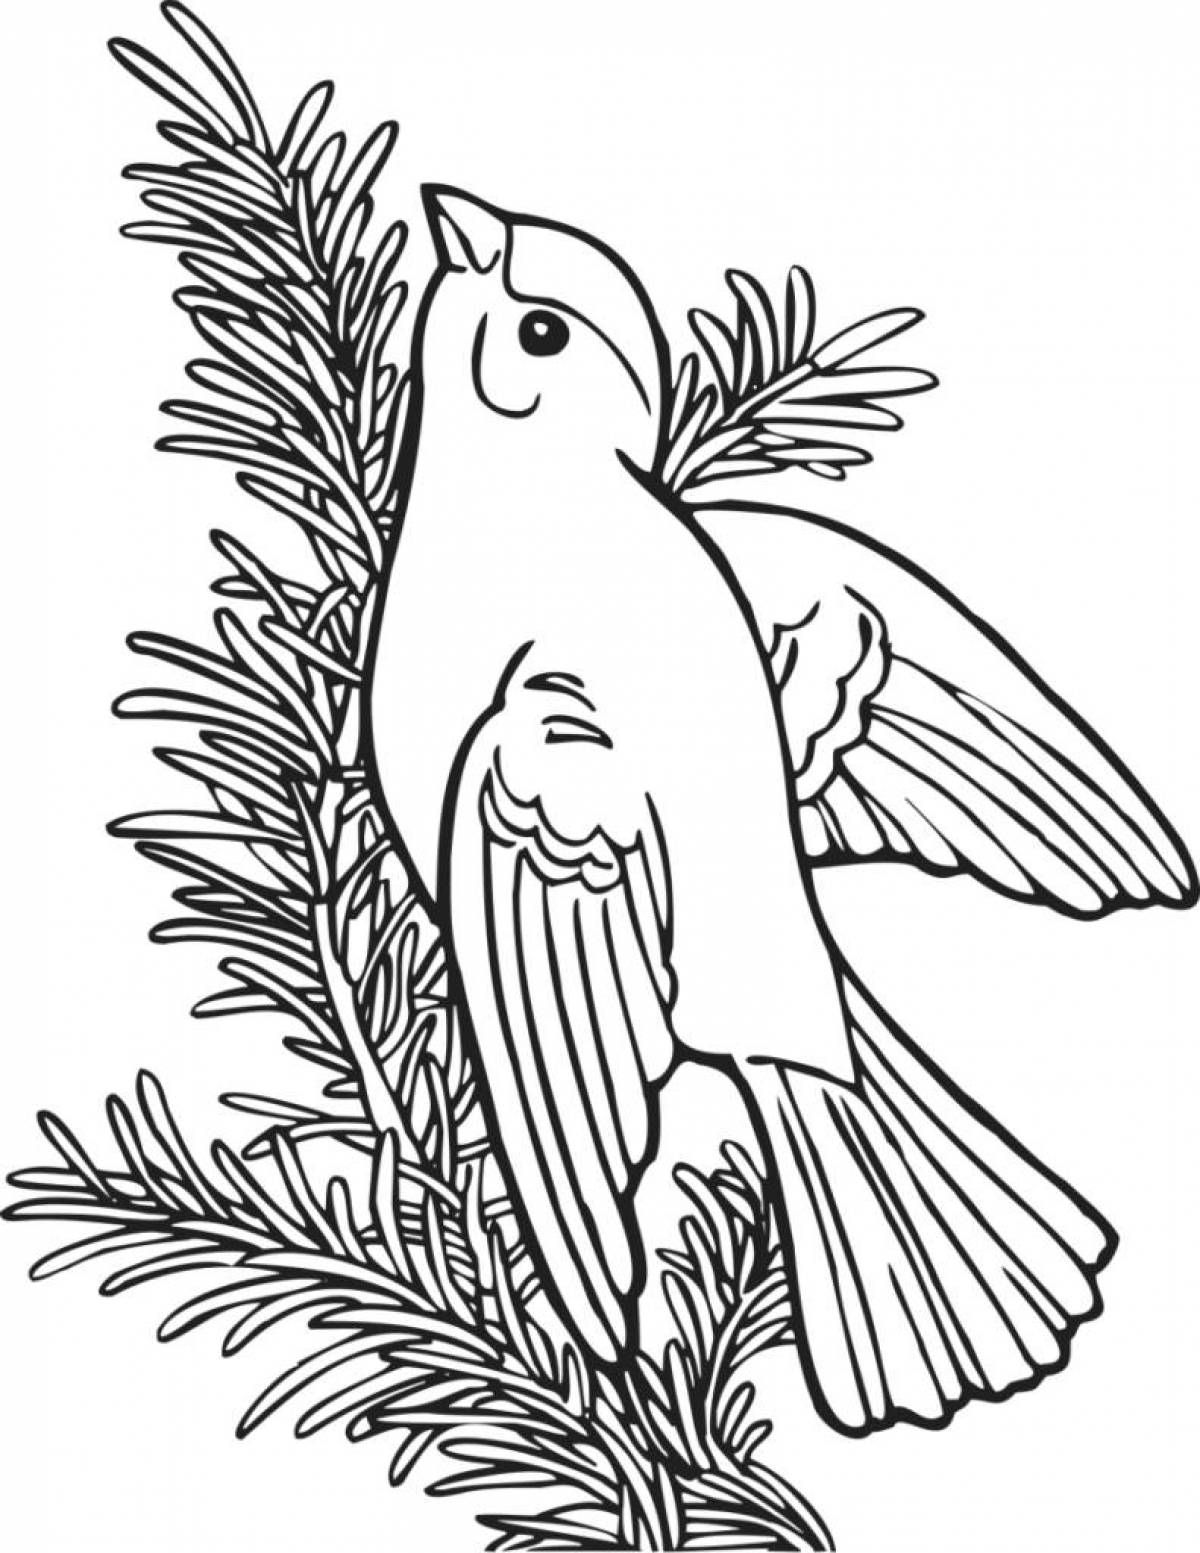 Charming crossbill coloring page